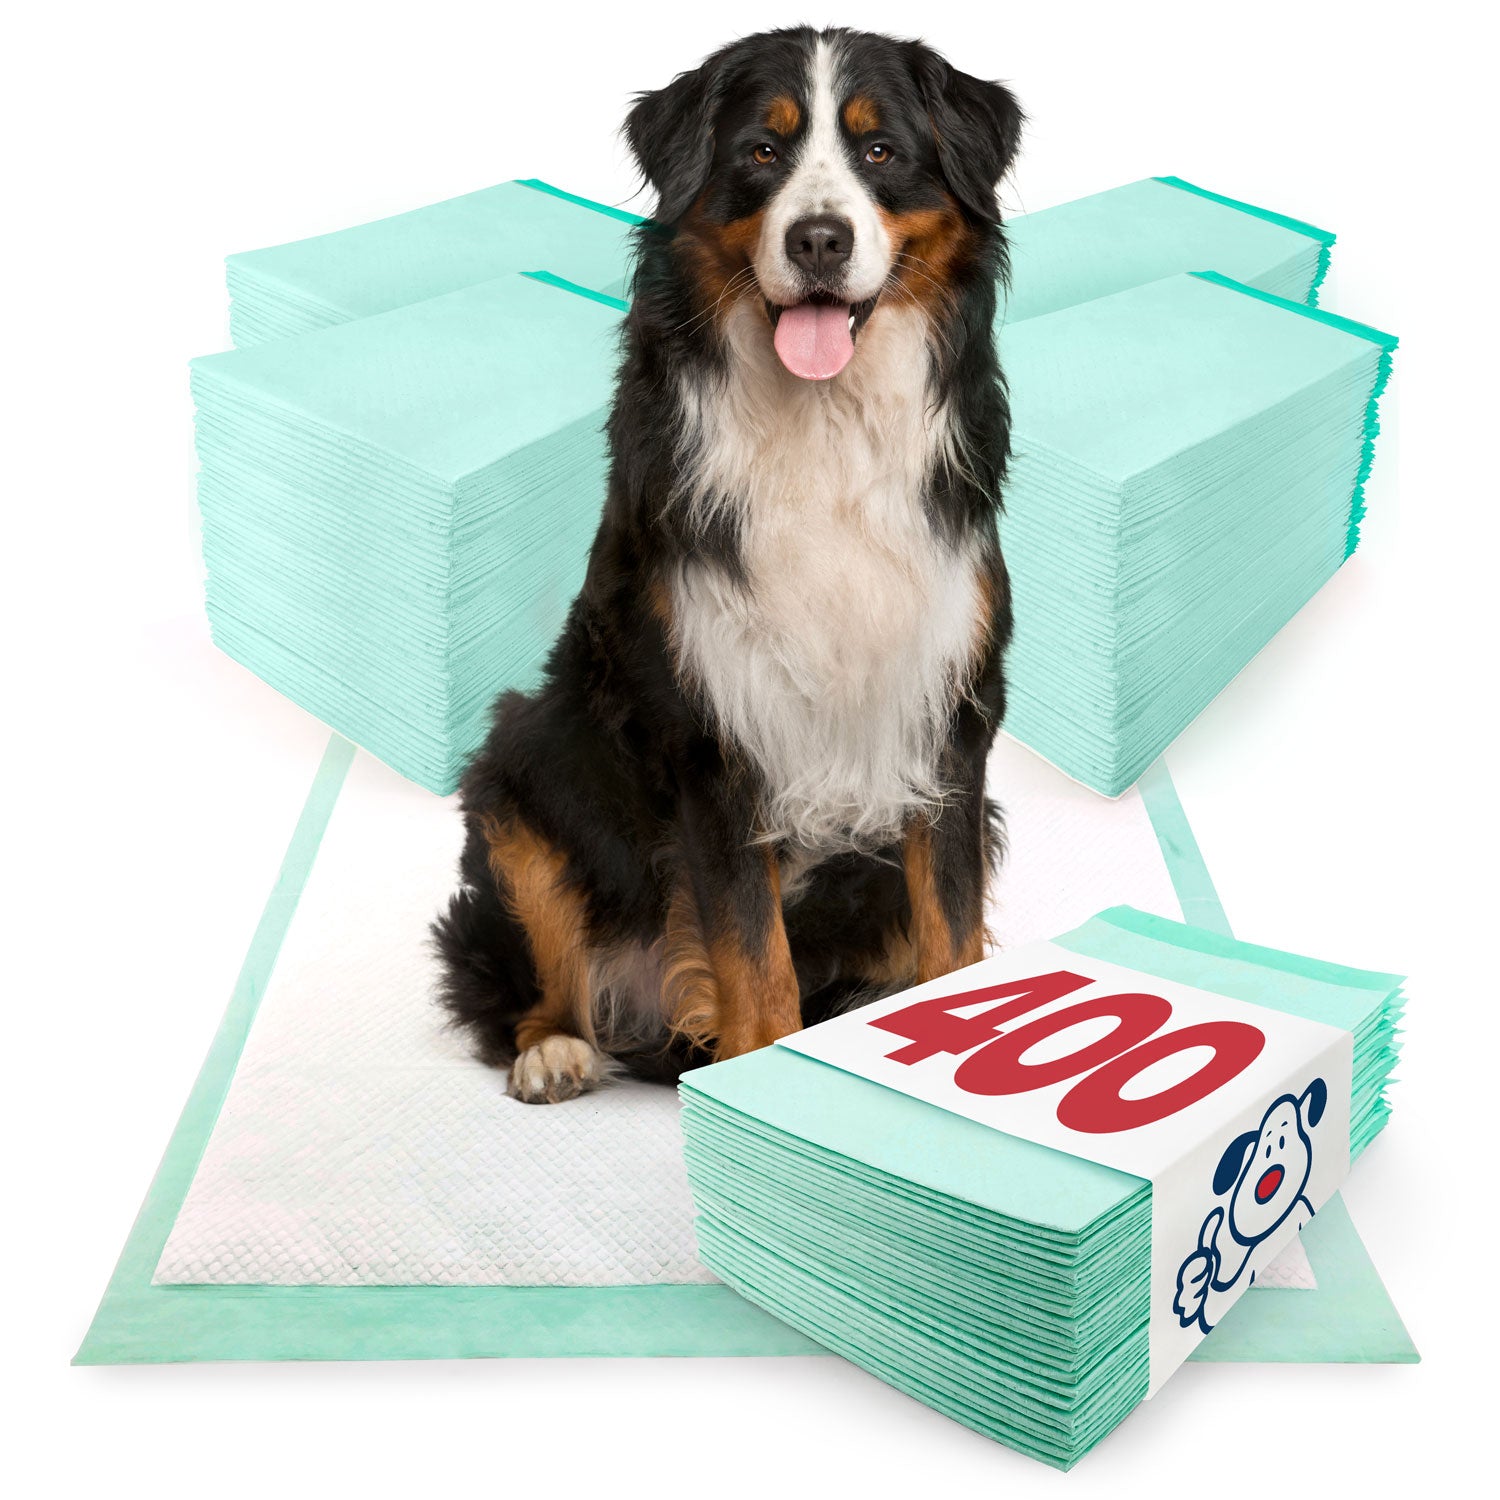 ValuePad Plus Puppy Pads, Extra Large 28x36 Inch, 400 Count WHOLESALE PACK